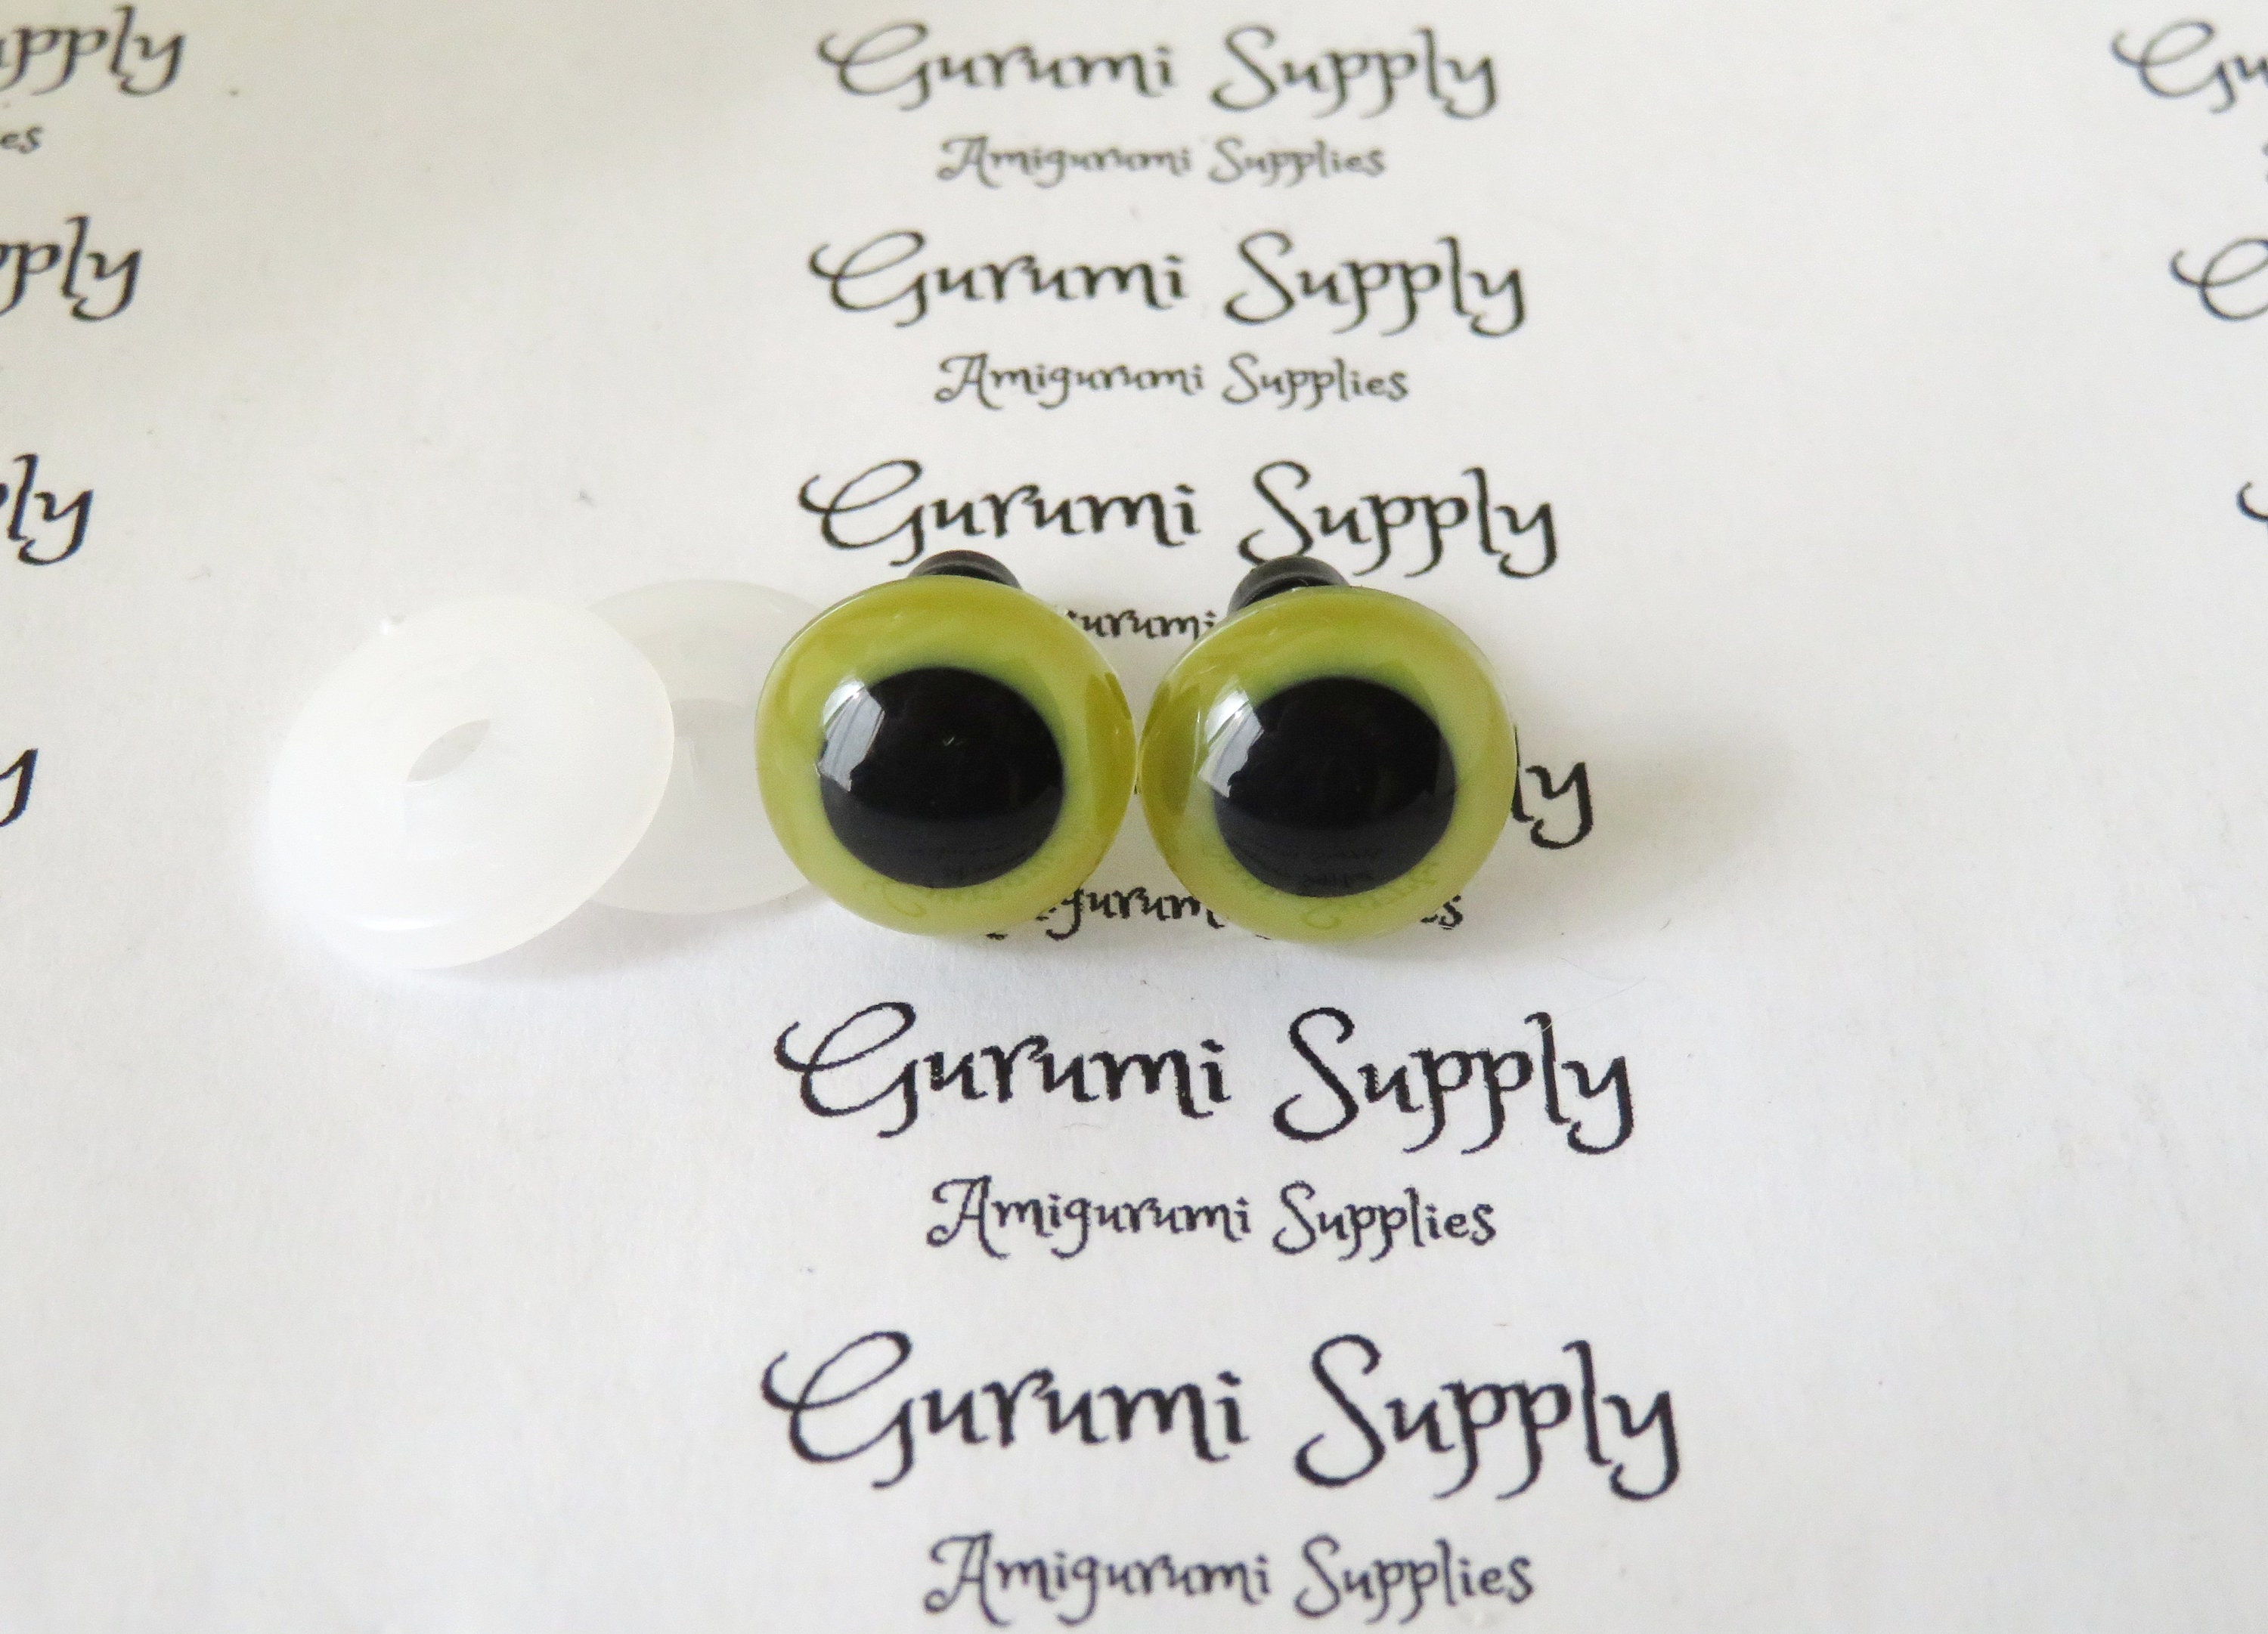 14mm Solid Black Round Safety Eyes with Washers: 2 Pair